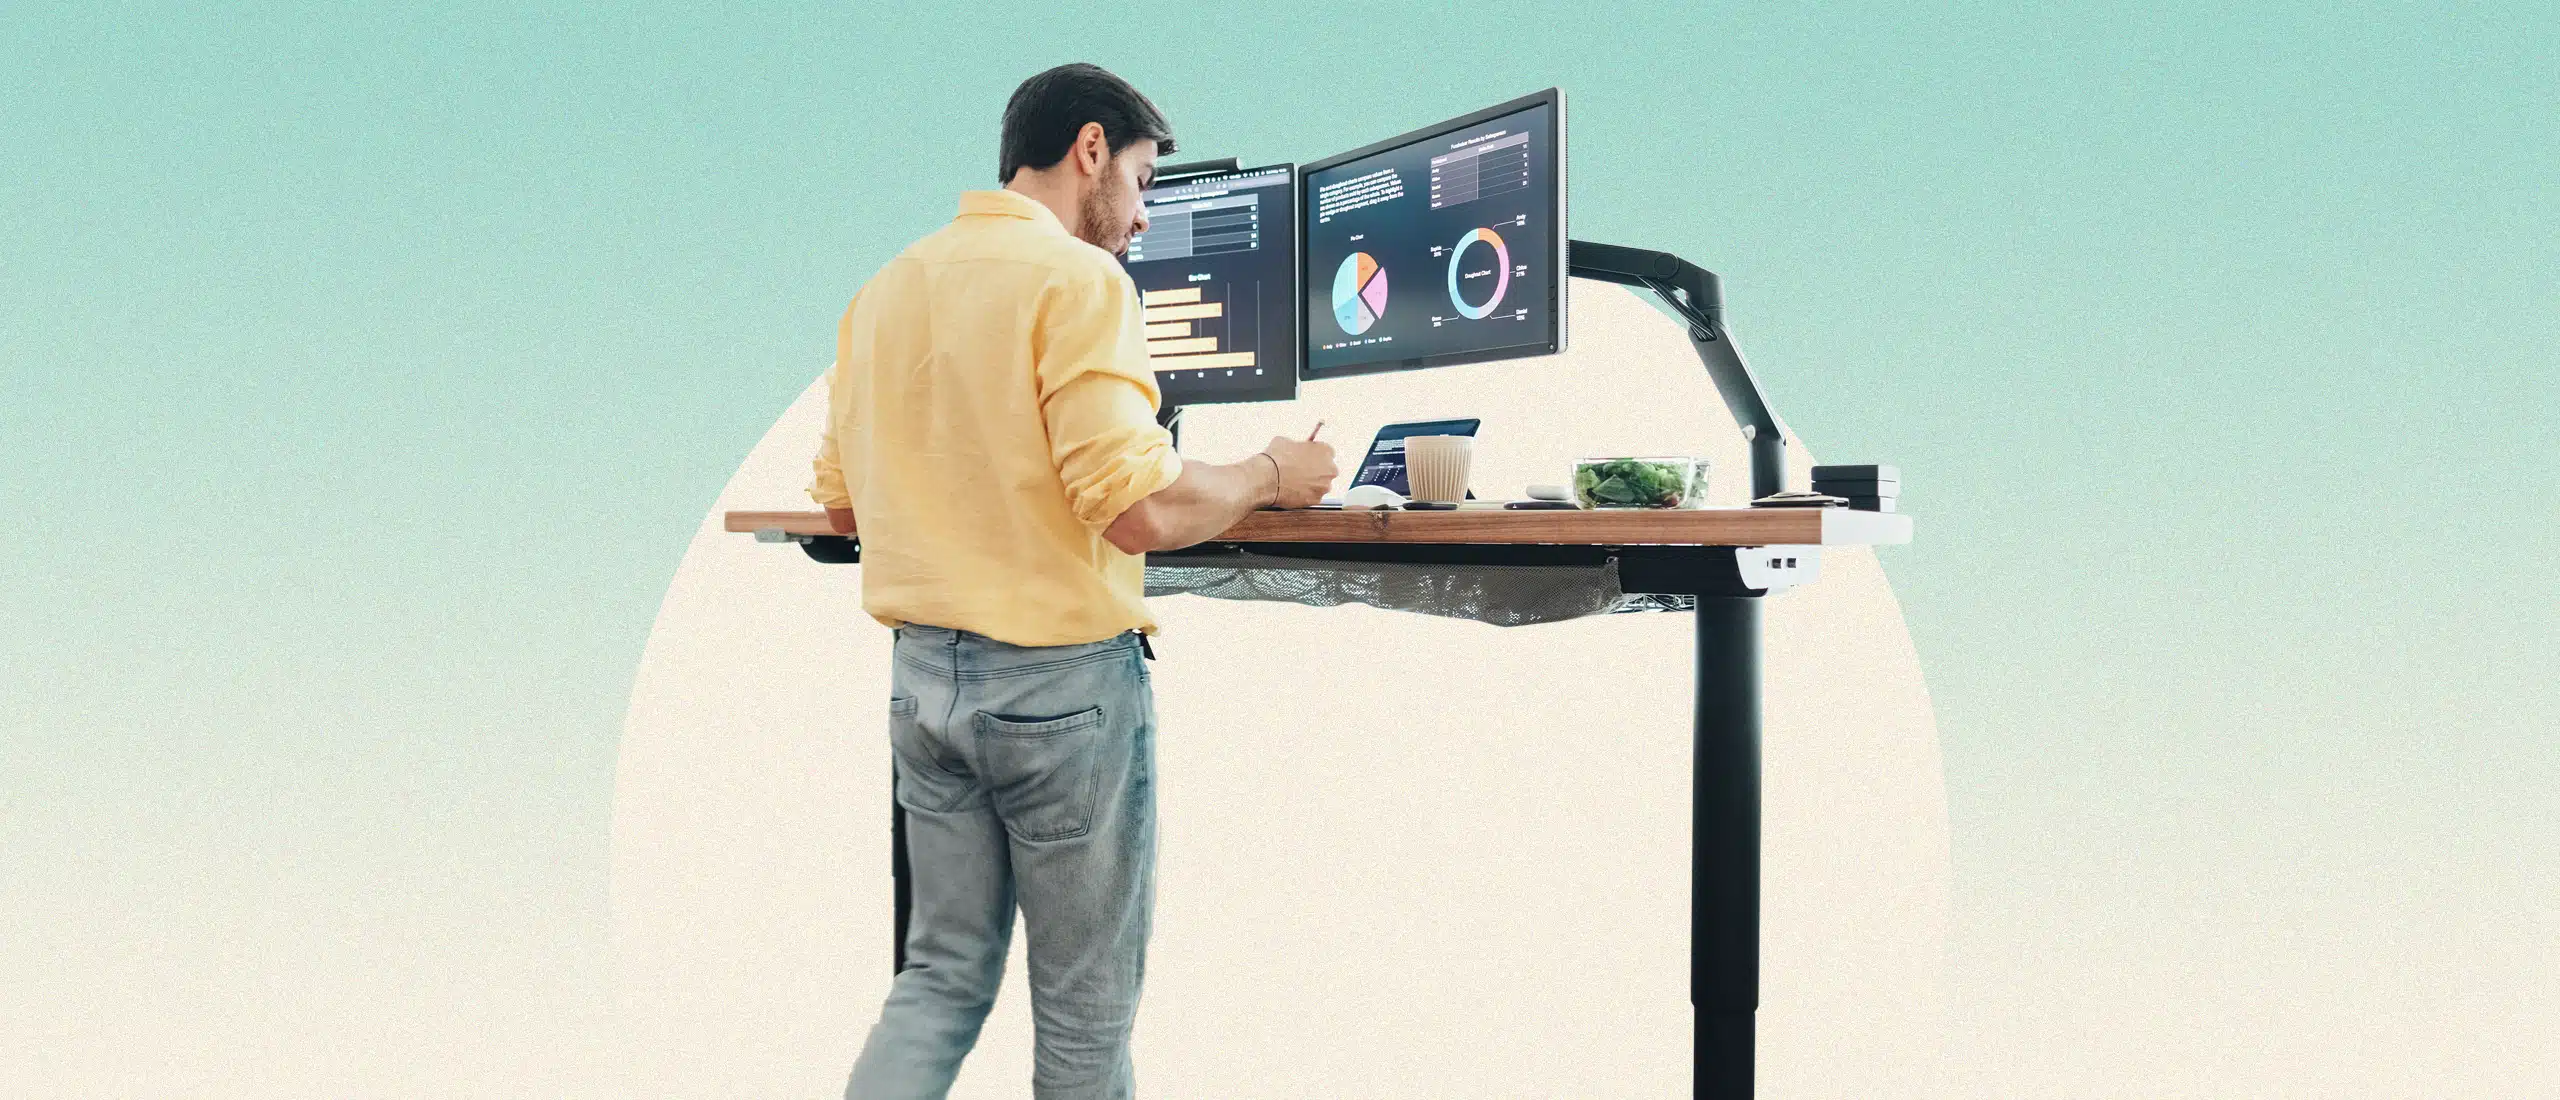 I Started Using an Adjustable Standing Desk at Work 2 Months Ago — and It's  Improved My Posture and Increased My Productivity